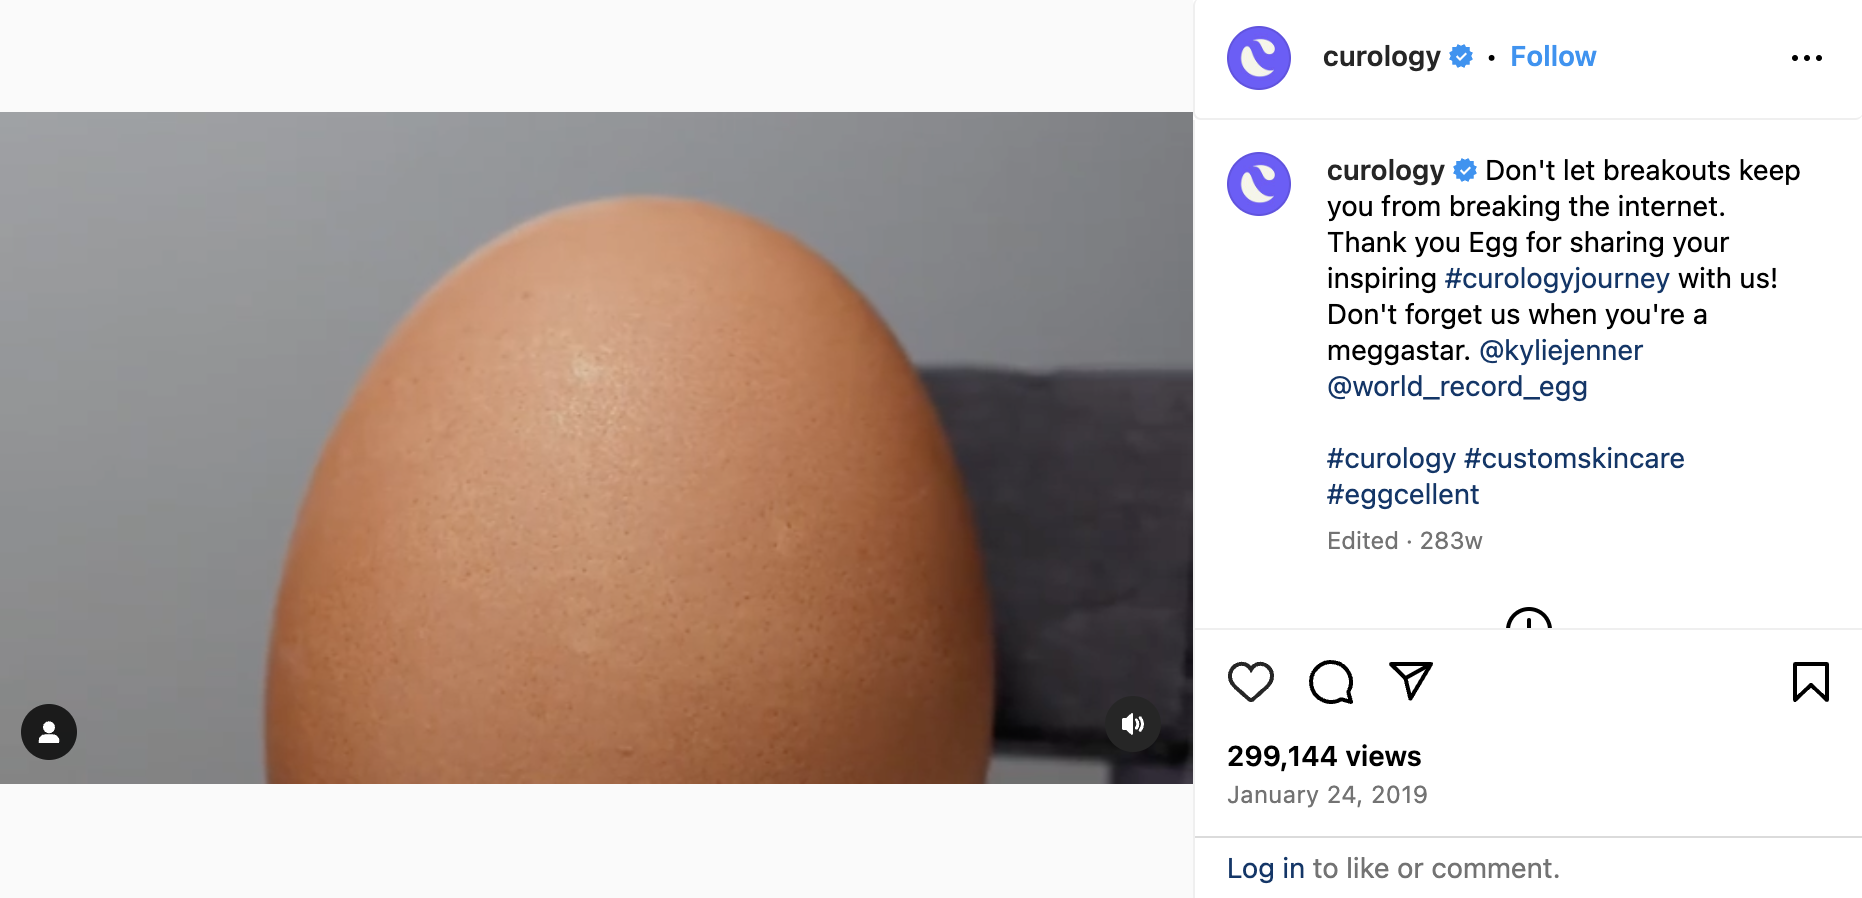 Lexie's first starring role as the Curology egg grabbed 300k views on Facebook.